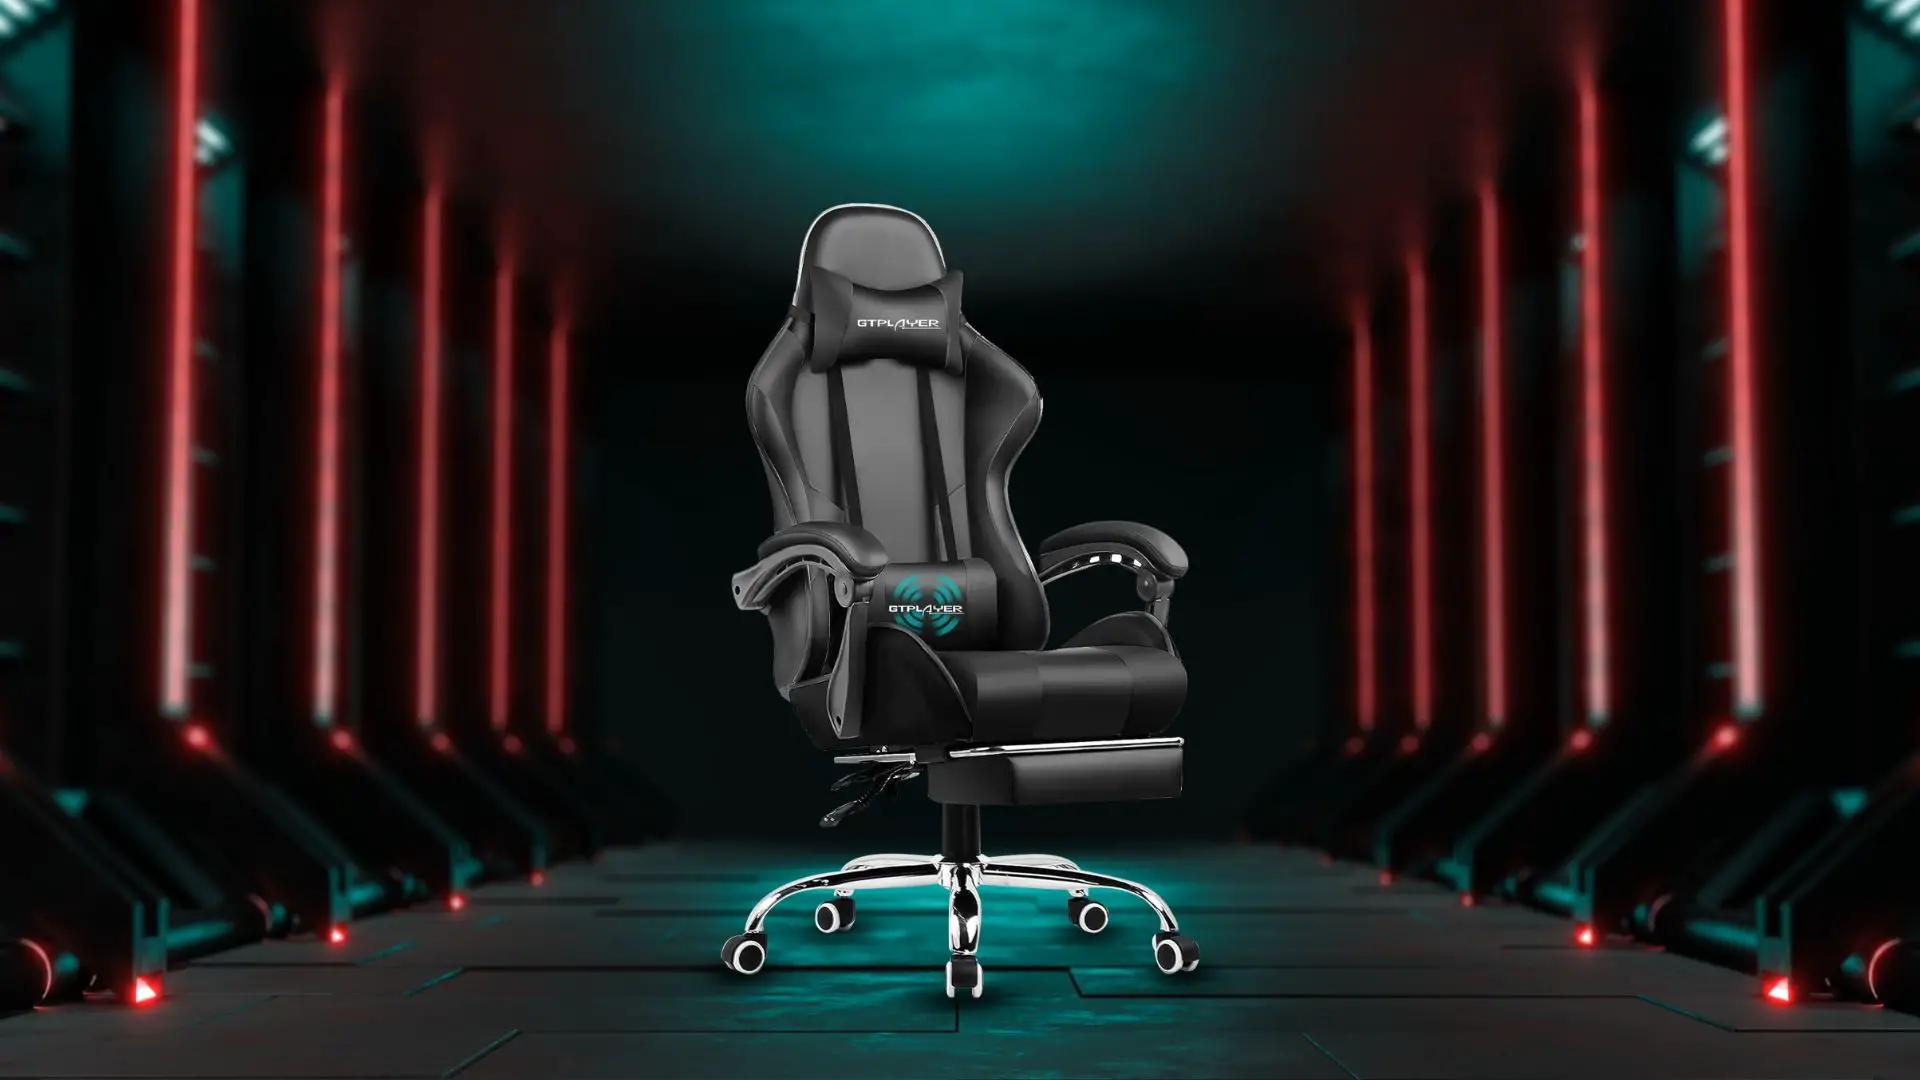 2.GTPPLAYER Gaming Chair